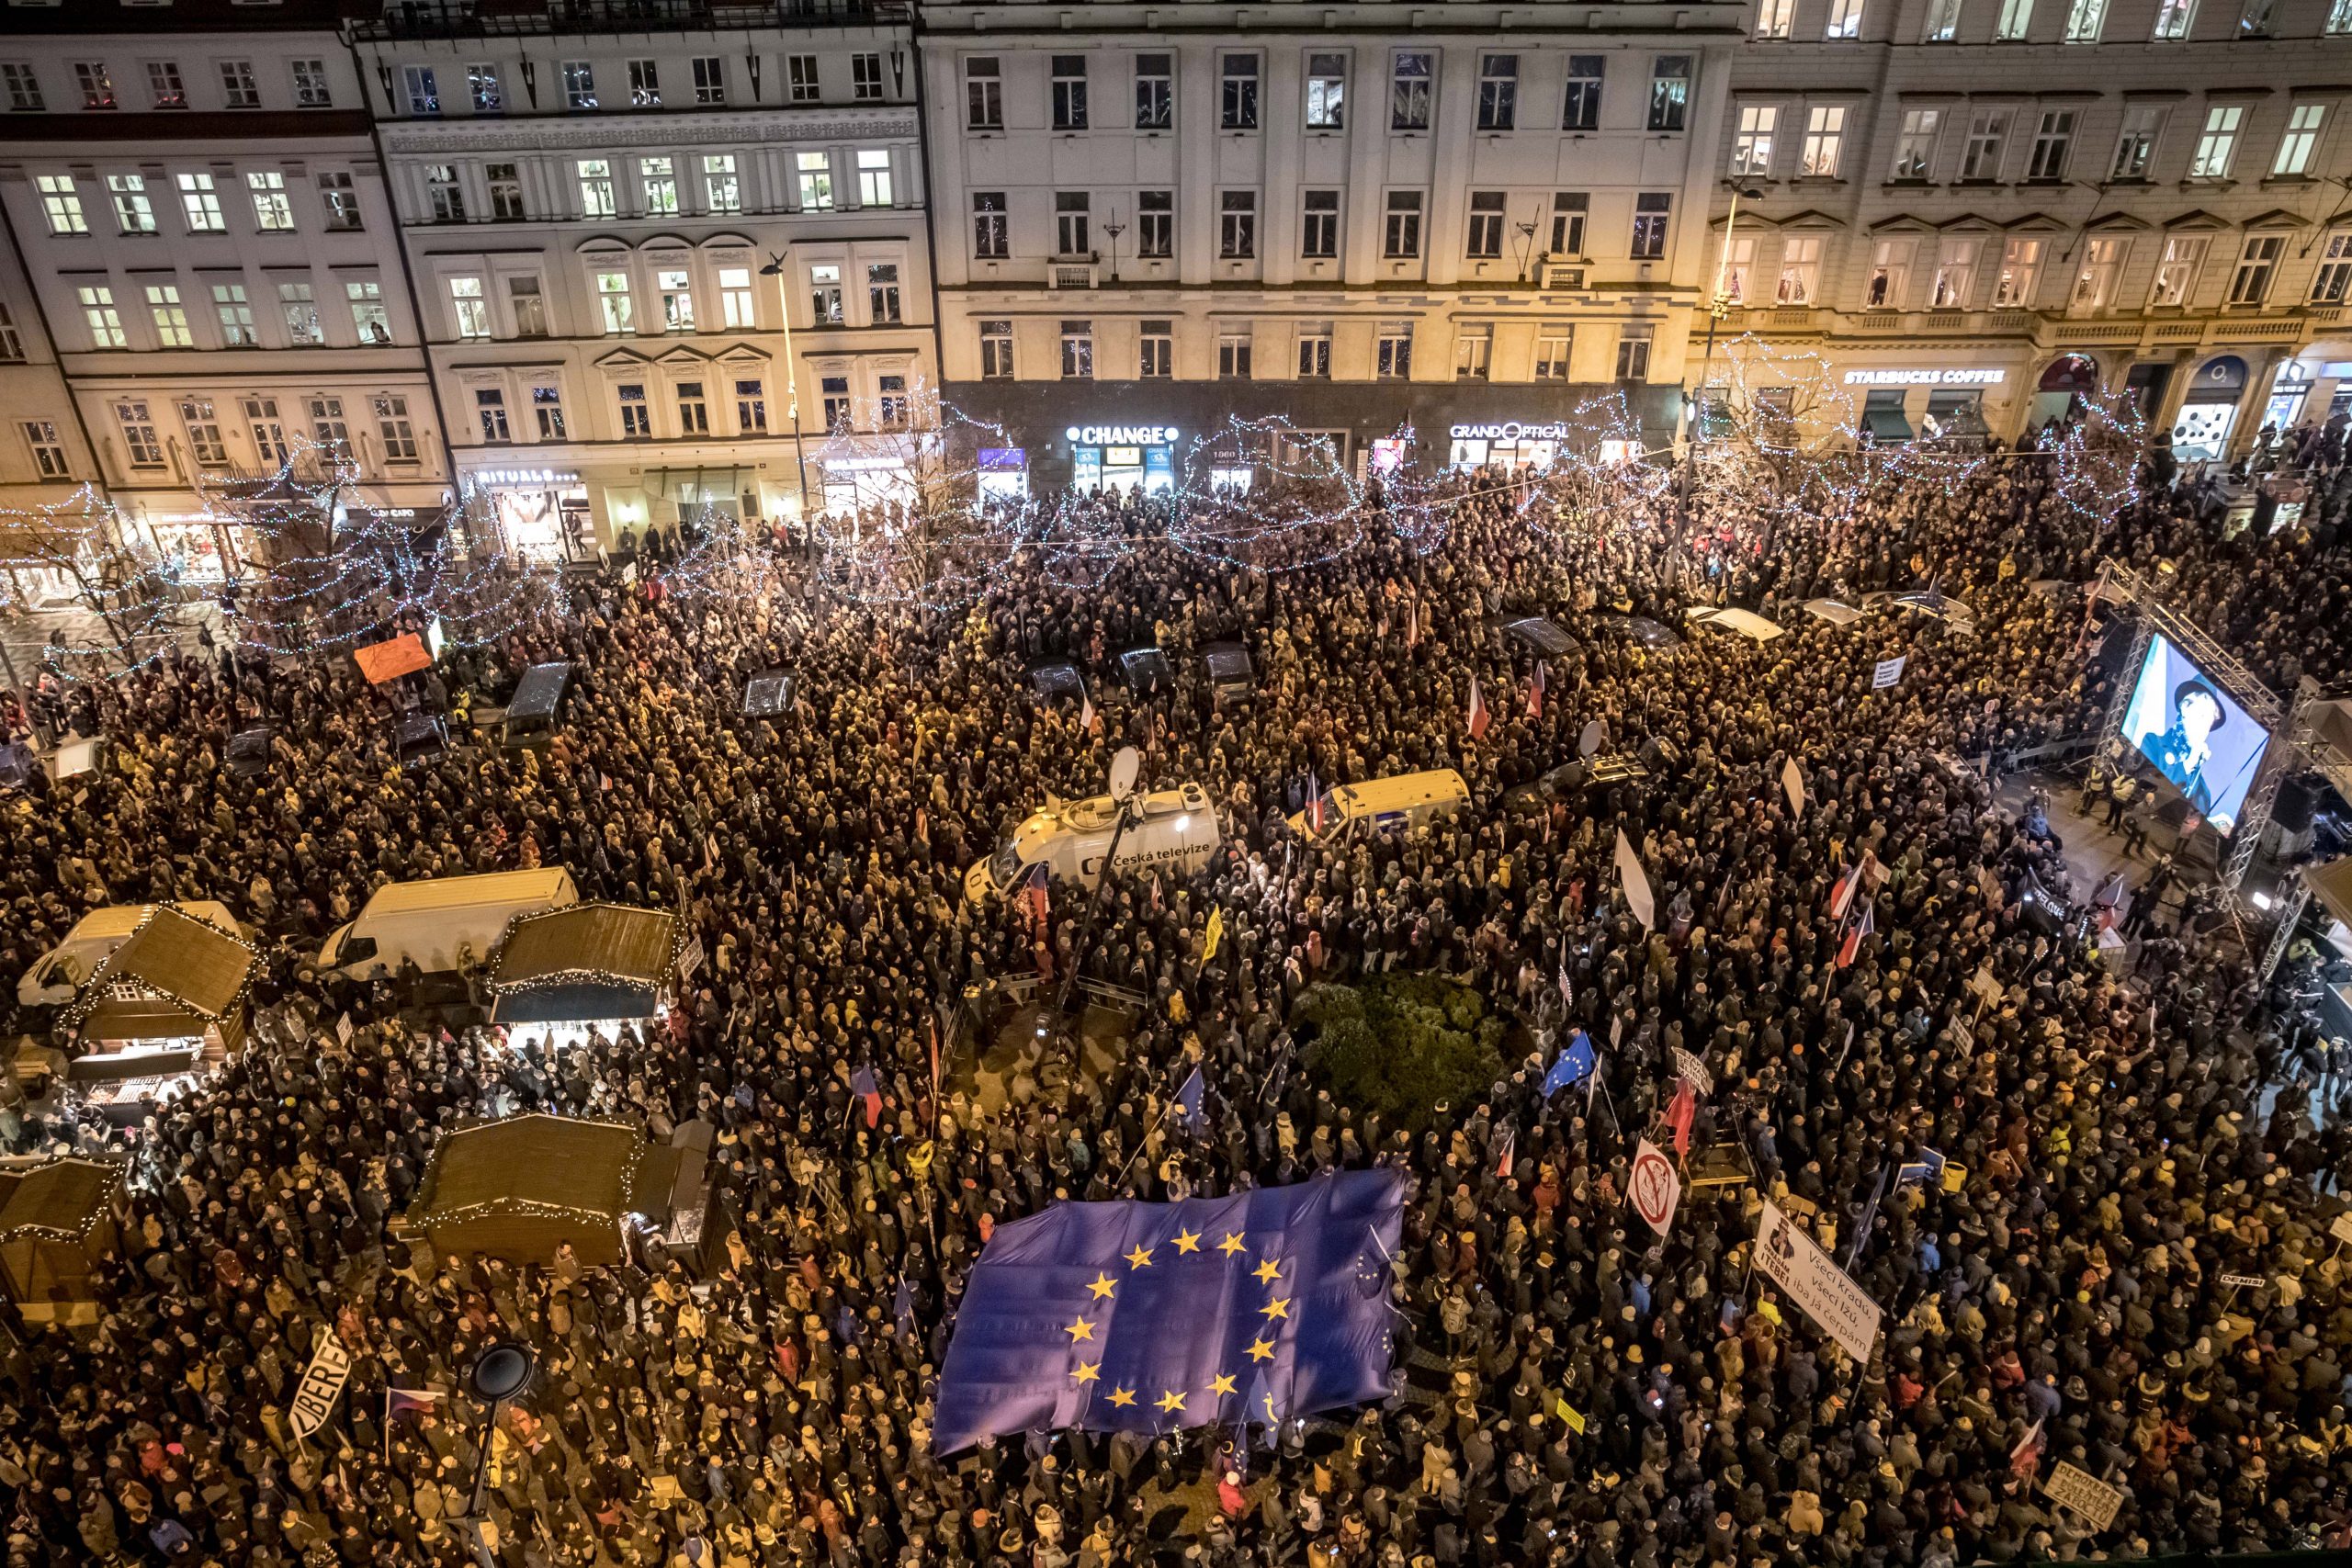 epa08060477 People gather to protest against Czech Prime Minister Andrej Babis at the Wenceslas Square in Prague, Czech Republic, 12 December 2019. Tens of thousands of people were demanding the resignation of Babis due to alleged conflicts of interest involving his former Agrofert conglomerate he founded. On 04 December 2019 high level Czech prosecutor Pavel Zeman has ordered the reopening of the probe into fraud allegations against Babis. The case that involves subsidies of European Union was dropped by the Prague state attorney in September 2019, and further investigations and new ruling ordered.  EPA/MARTIN DIVISEK